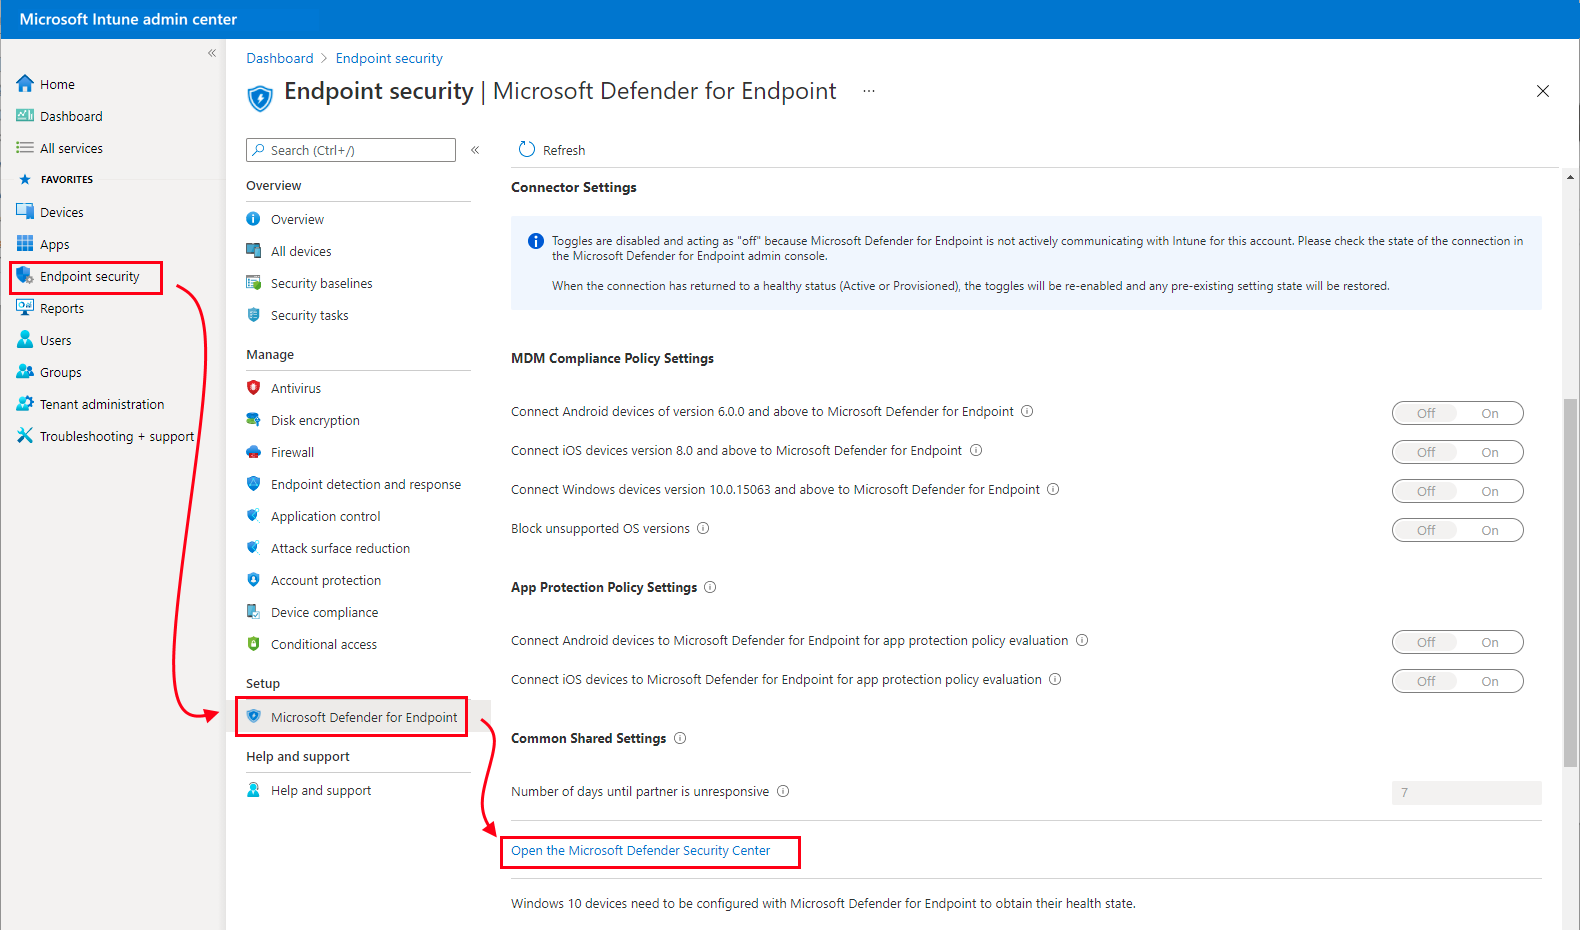 Screen shot that shows the patch to open the Microsoft Defender Security Center.